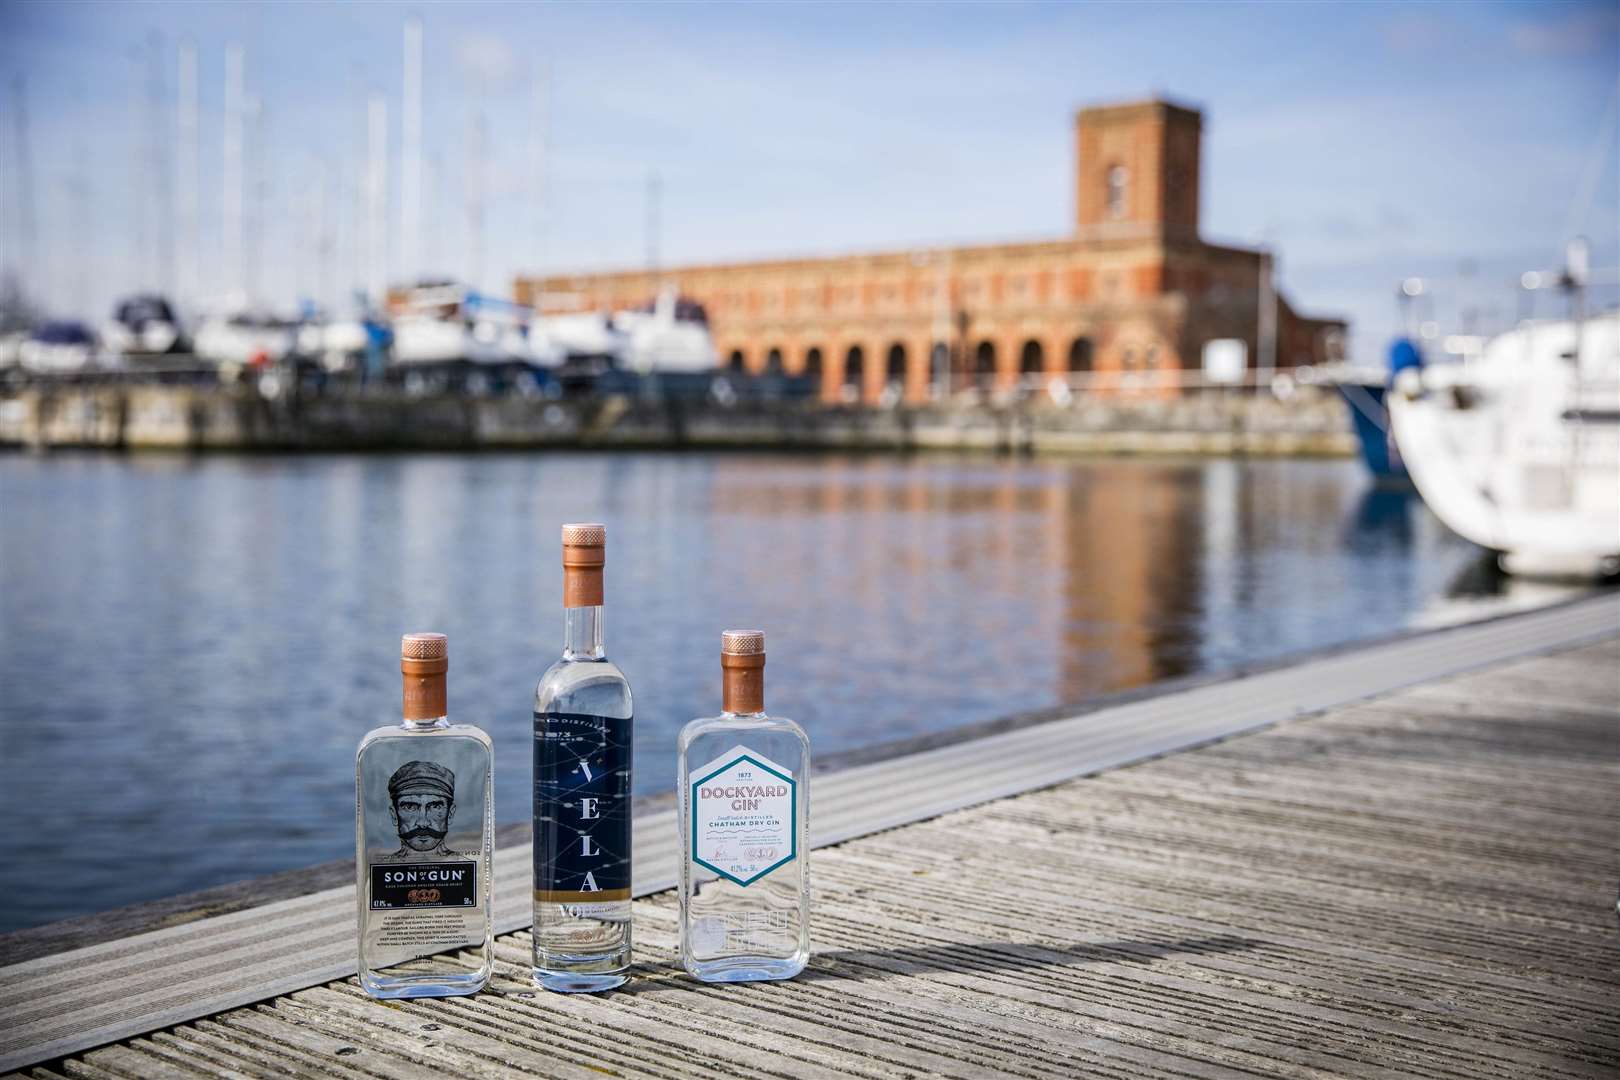 The distillery is known locally for its gin, vodka and hand sanitiser. Picture: Thomas Alexander